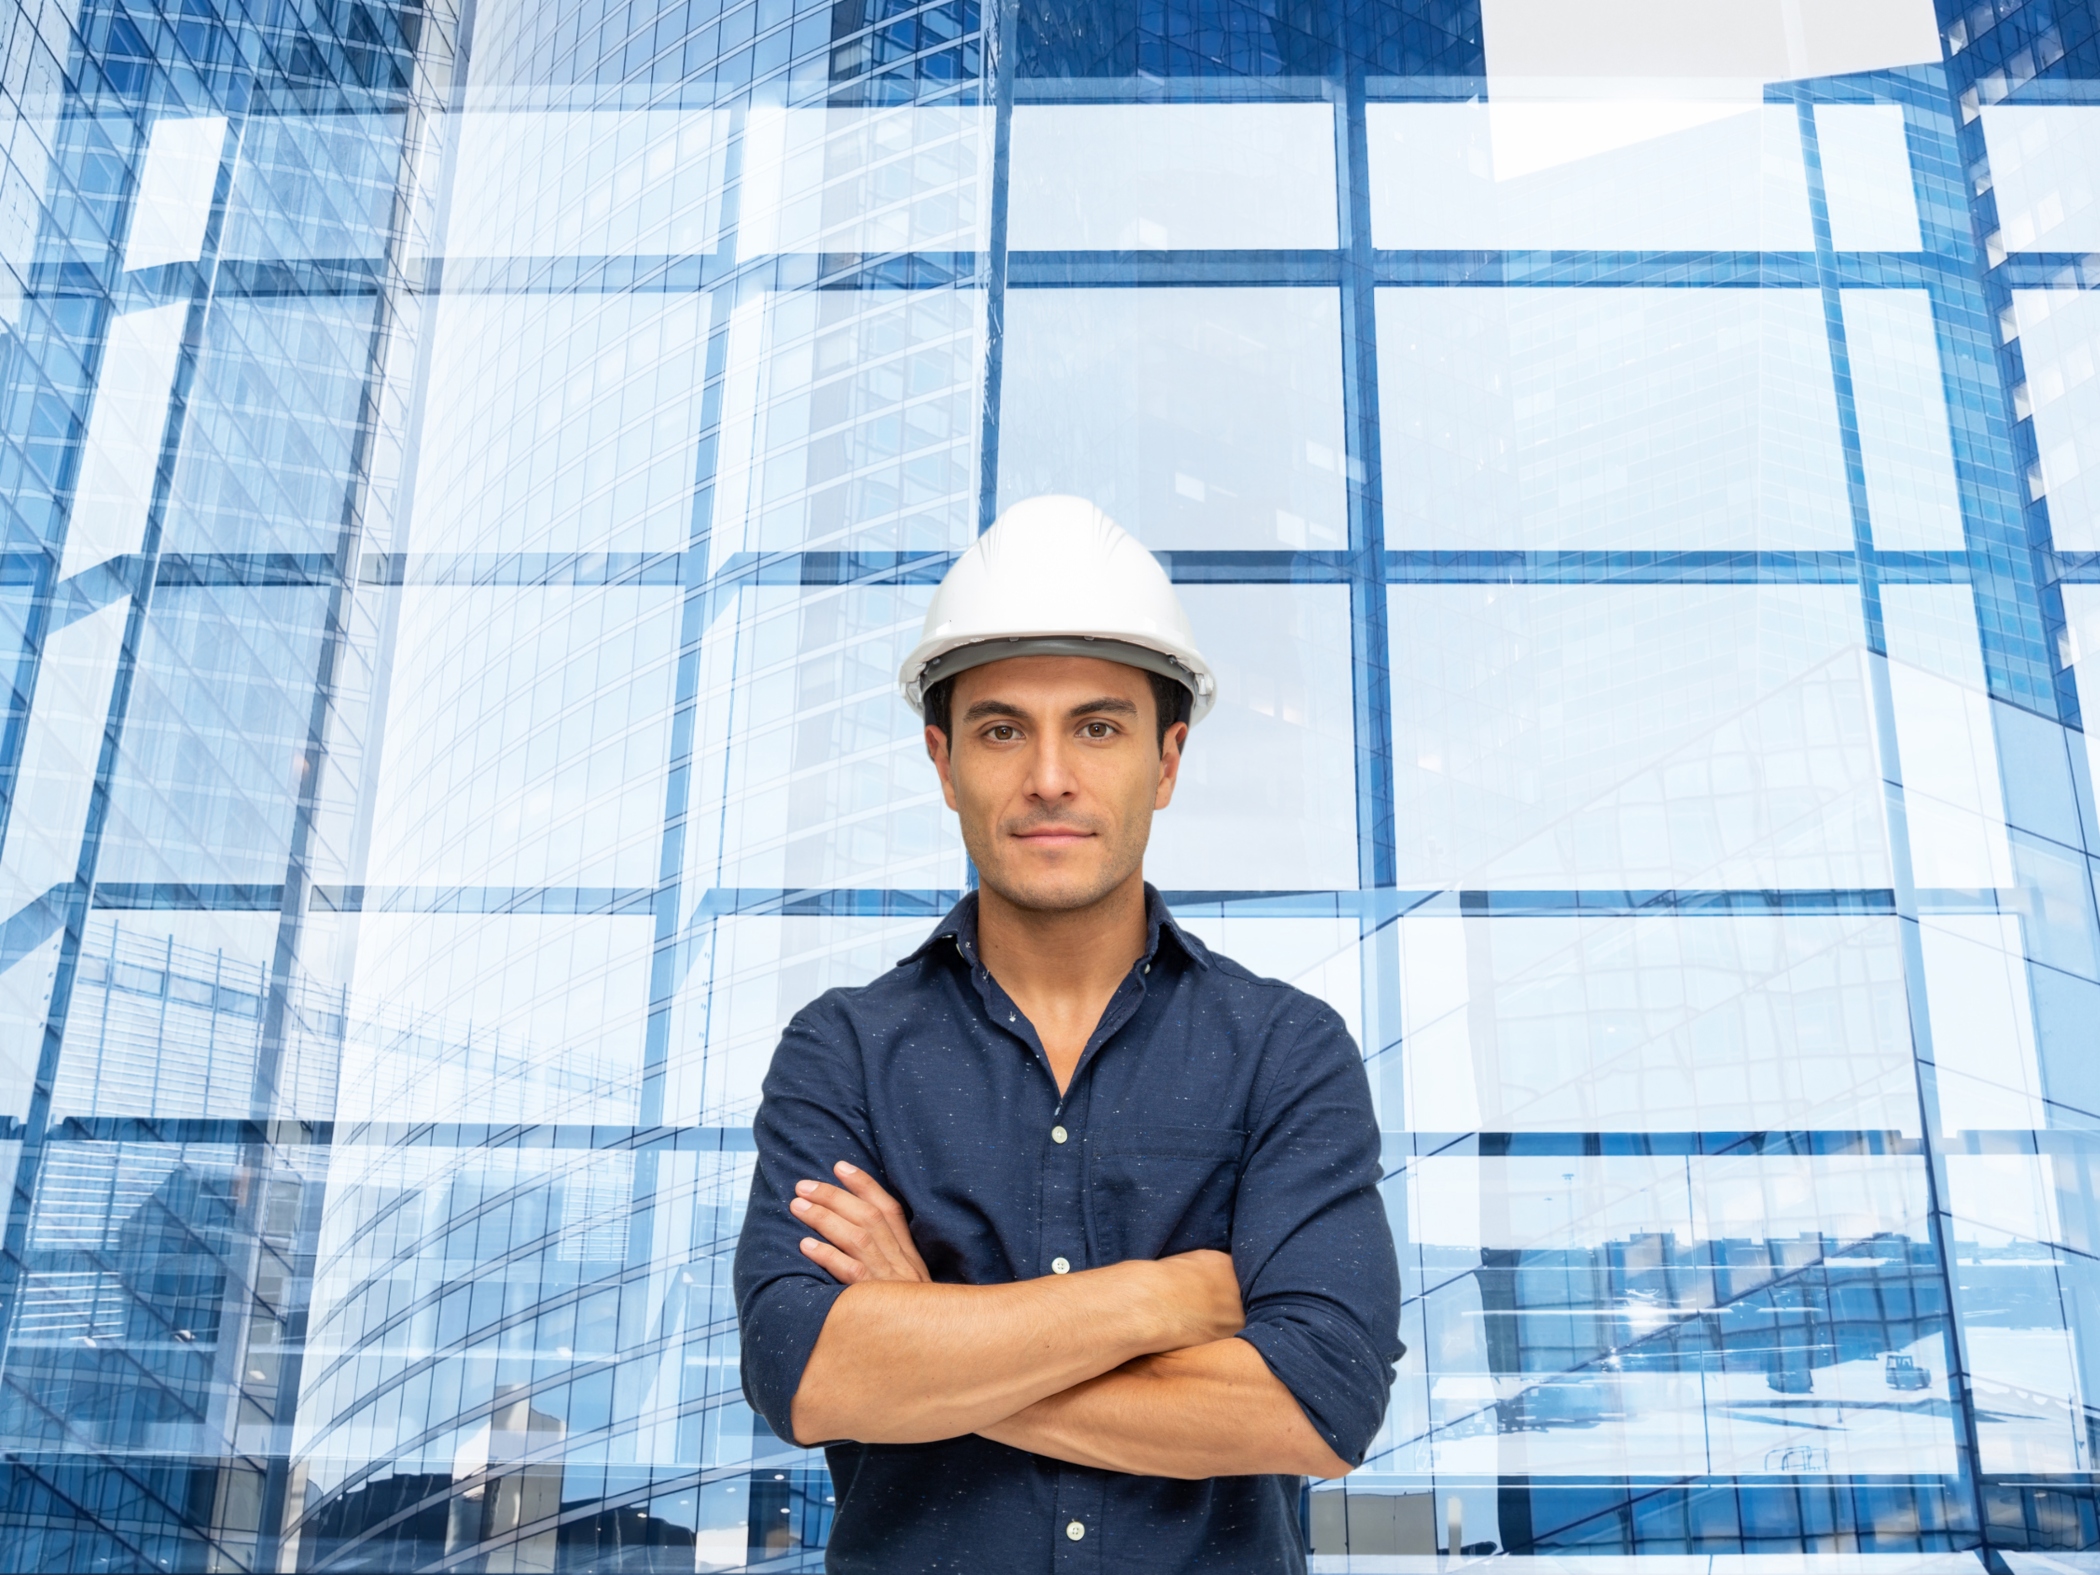 Engineer standing in front of office building